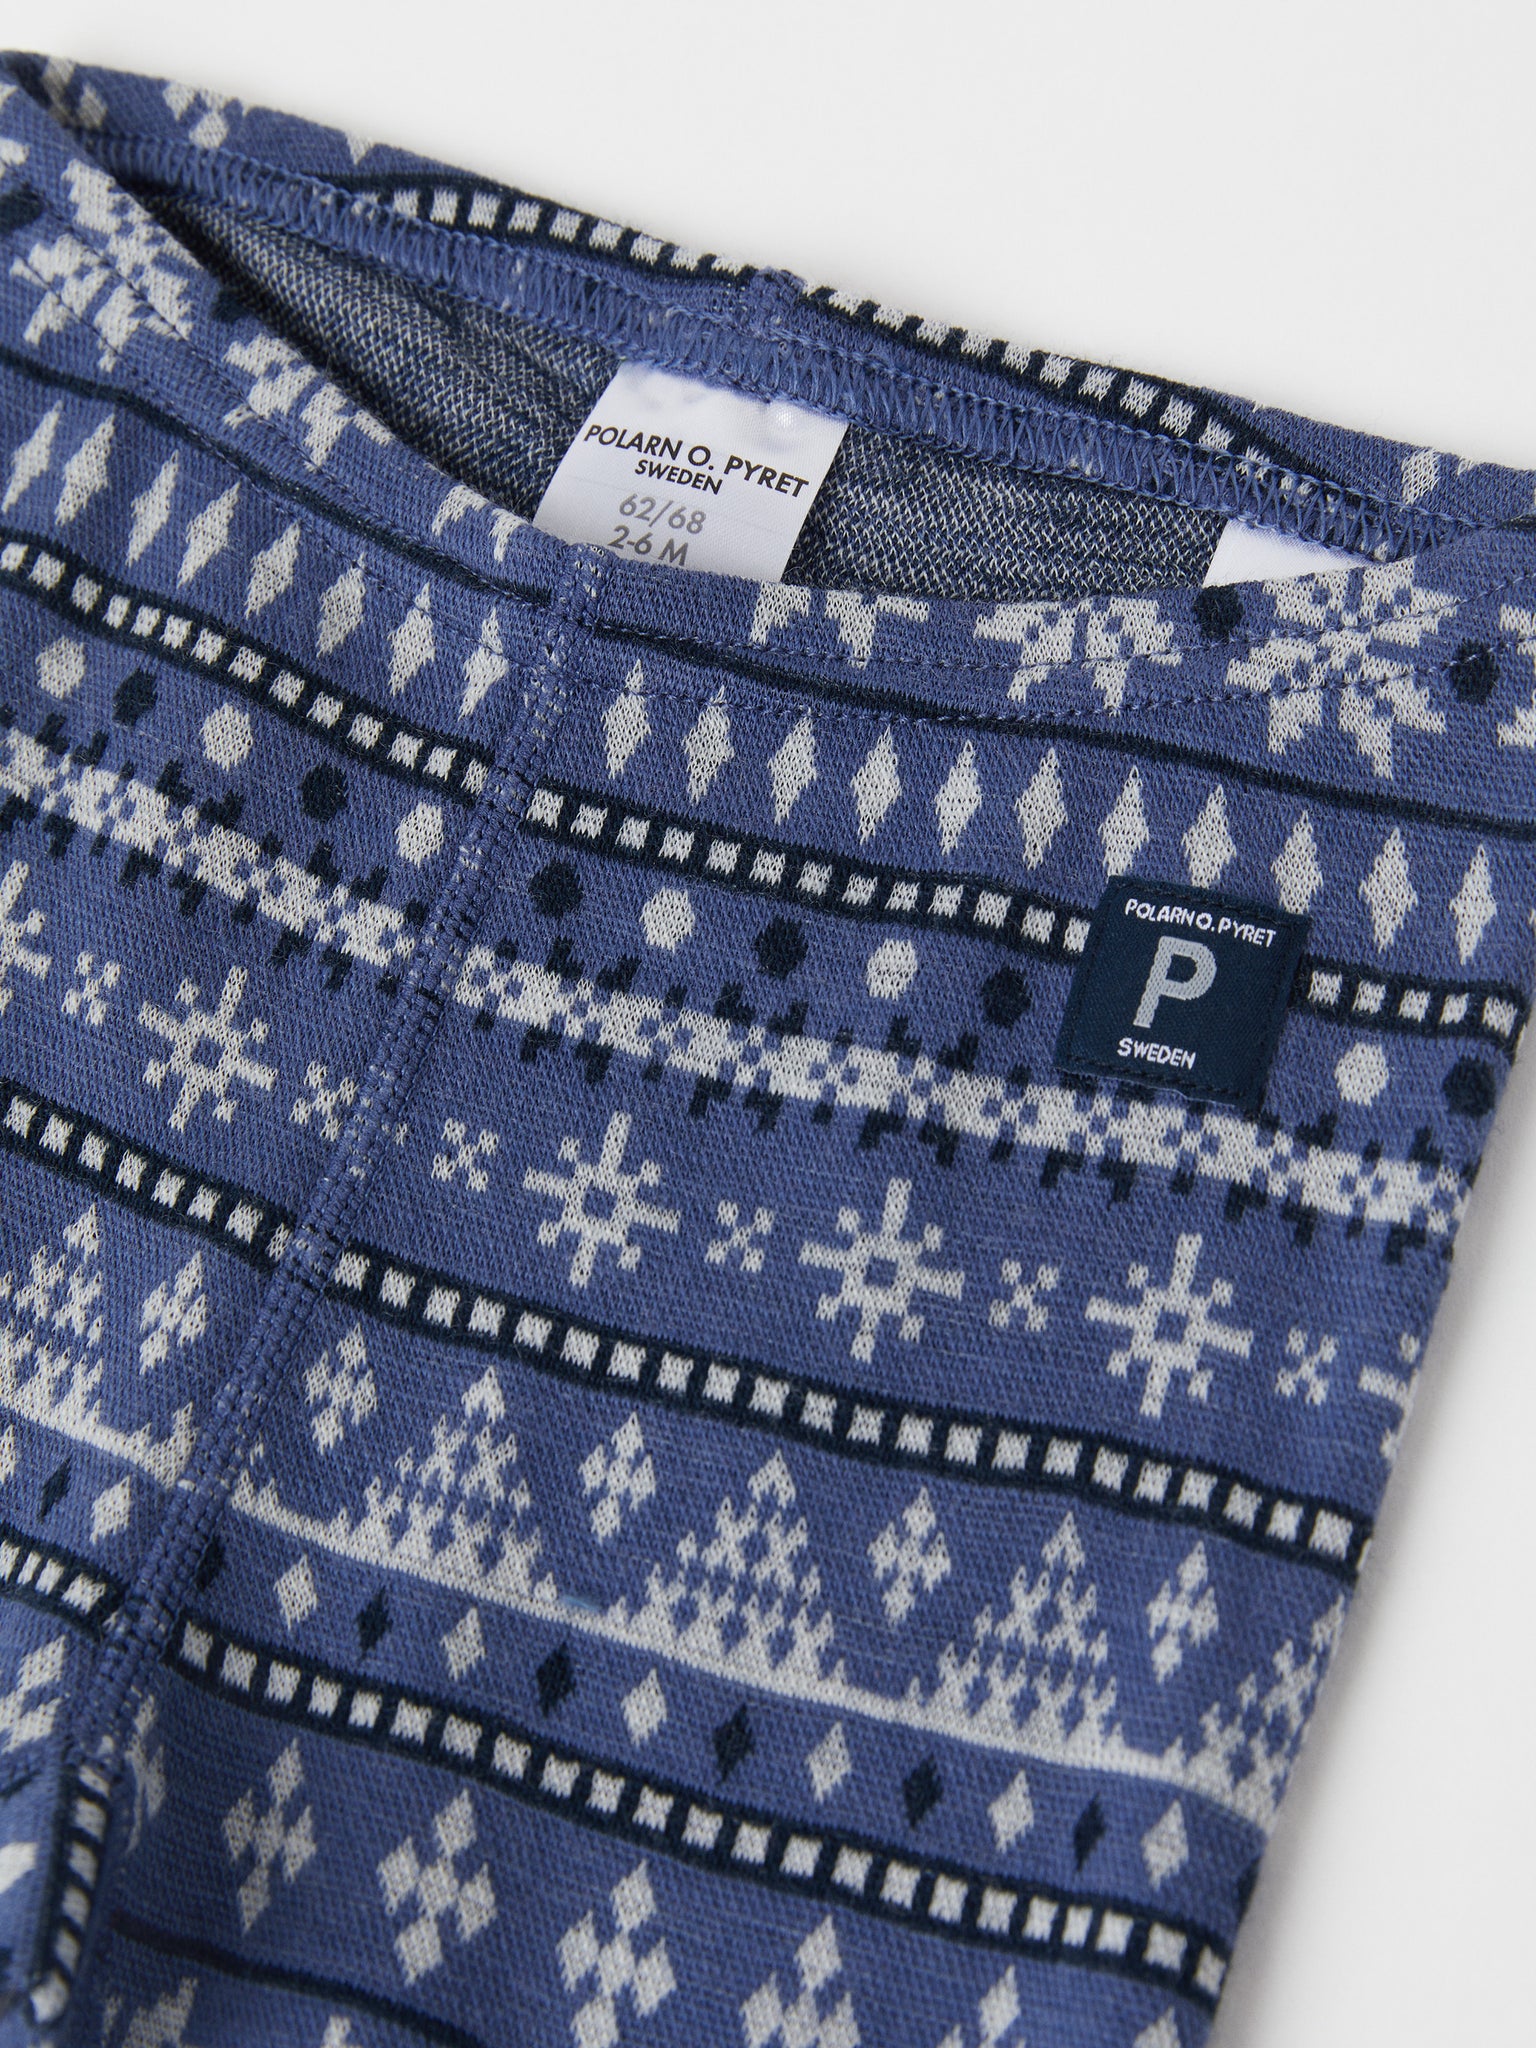 Merino Navy Kids Thermal Leggings from the Polarn O. Pyret outerwear collection. Ethically produced kids outerwear.